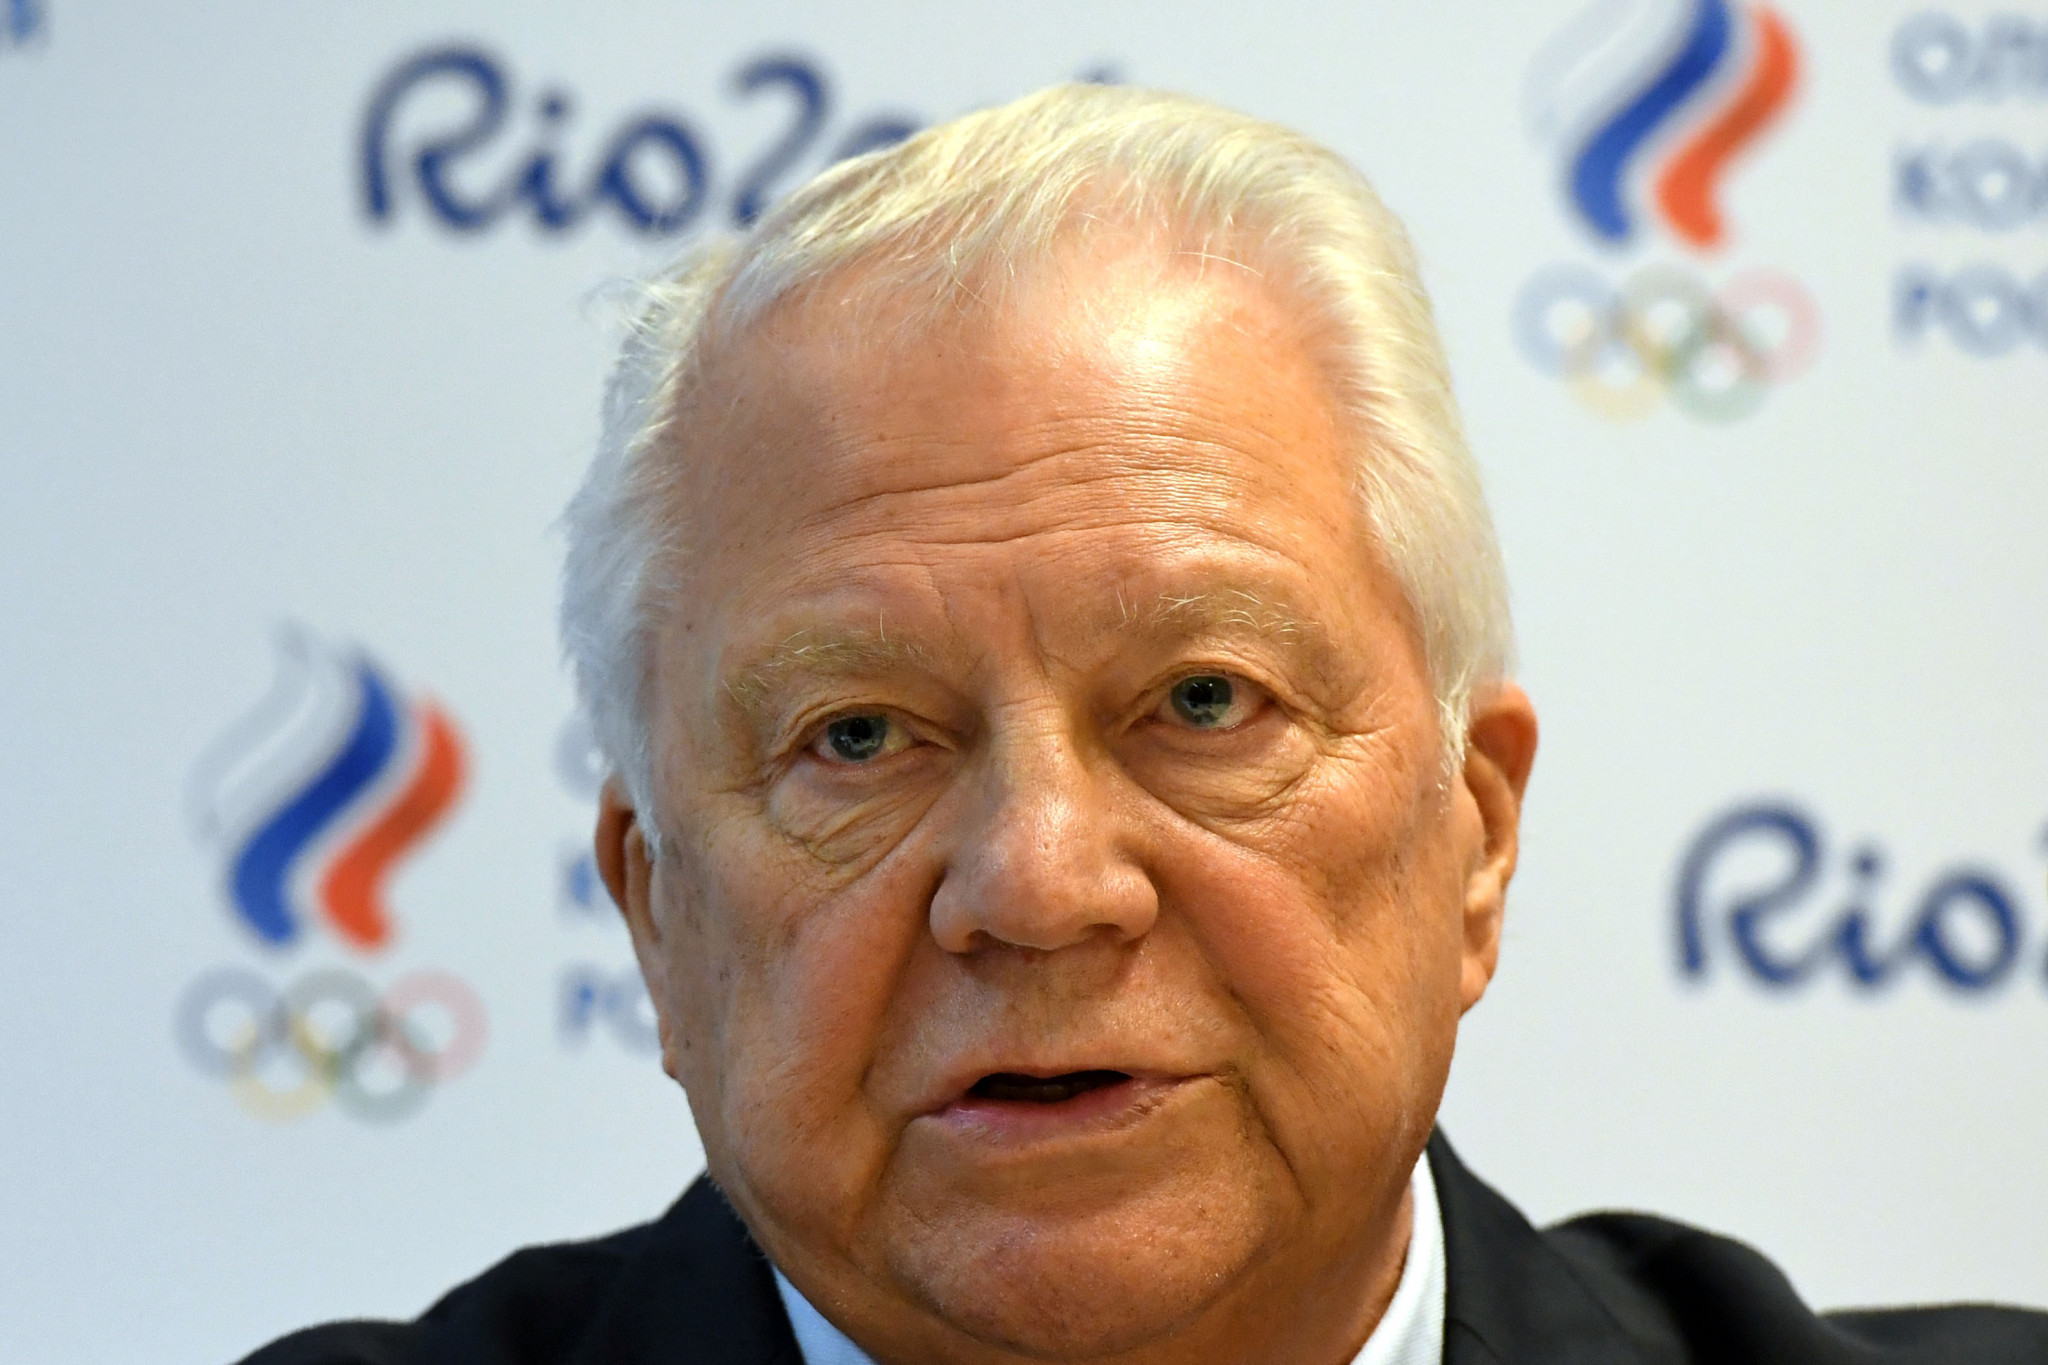 Honorary International Olympic Committee member Vitaly Smirnov is one of four Russian IOC members or honorary members sanctioned by Ukraine's Government ©Getty Images